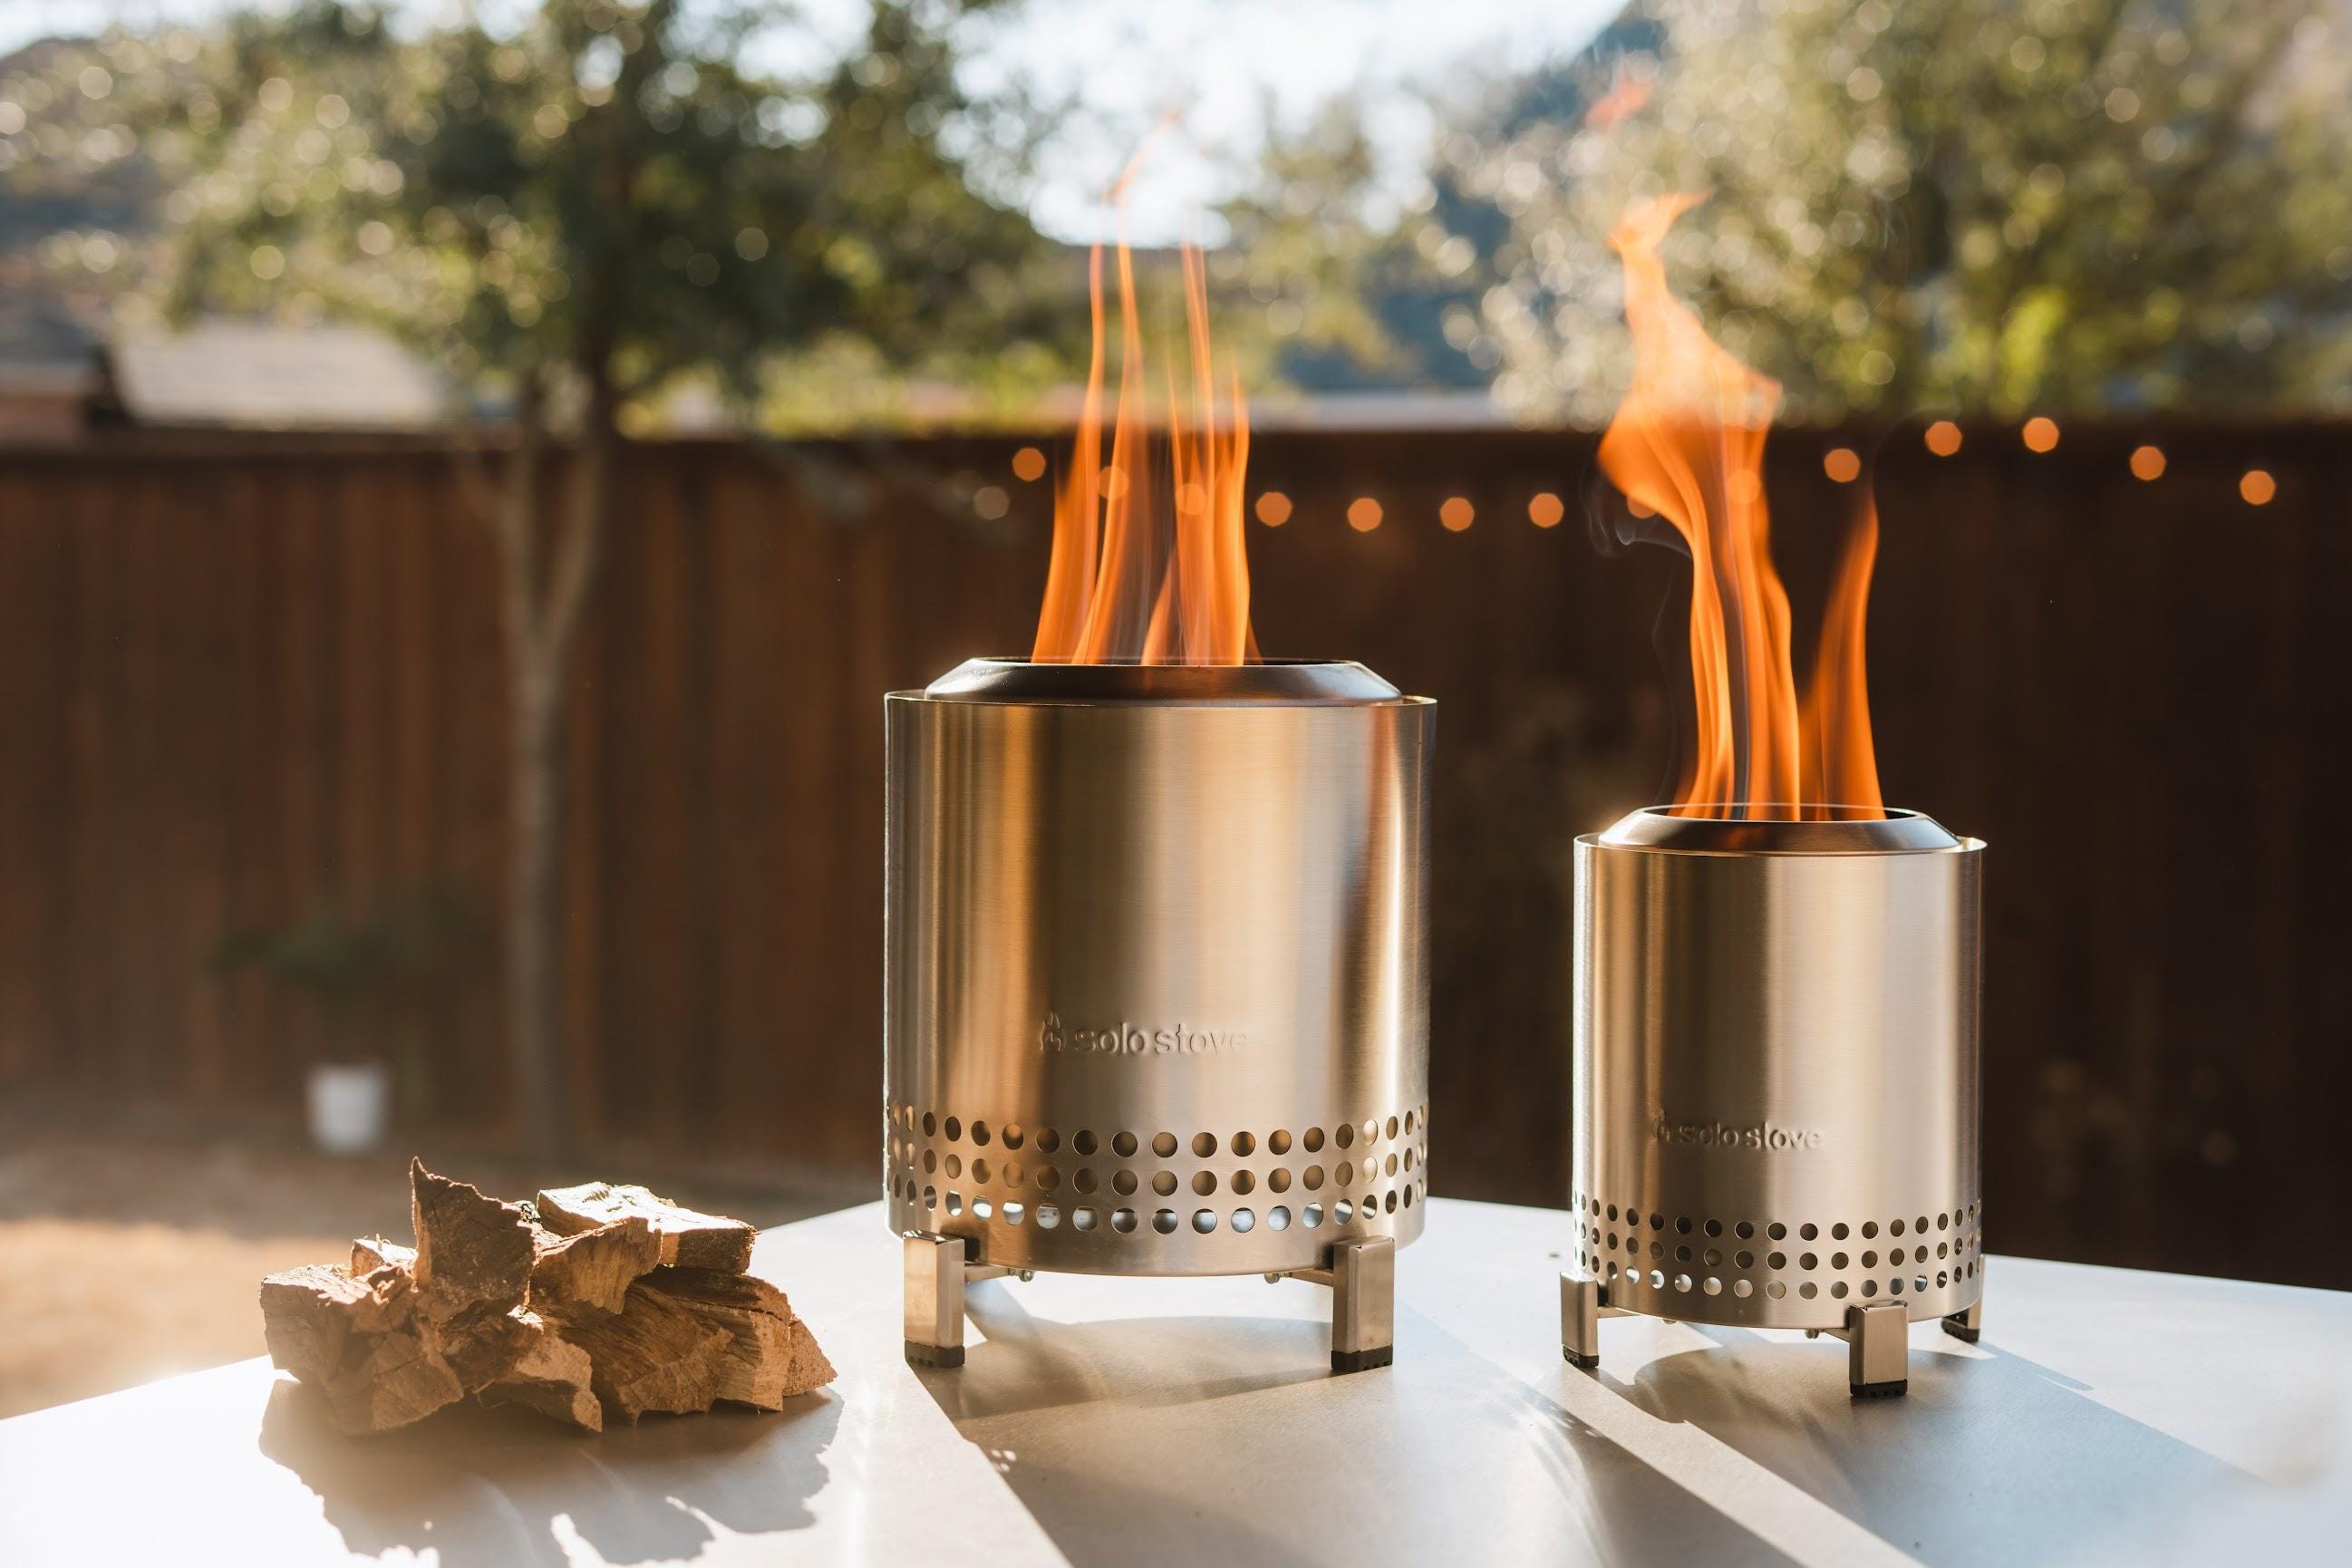 Solo Stove Just Launched the Mesa XL, Making Backyard S'mores Much More Attainable Any Night of the Week